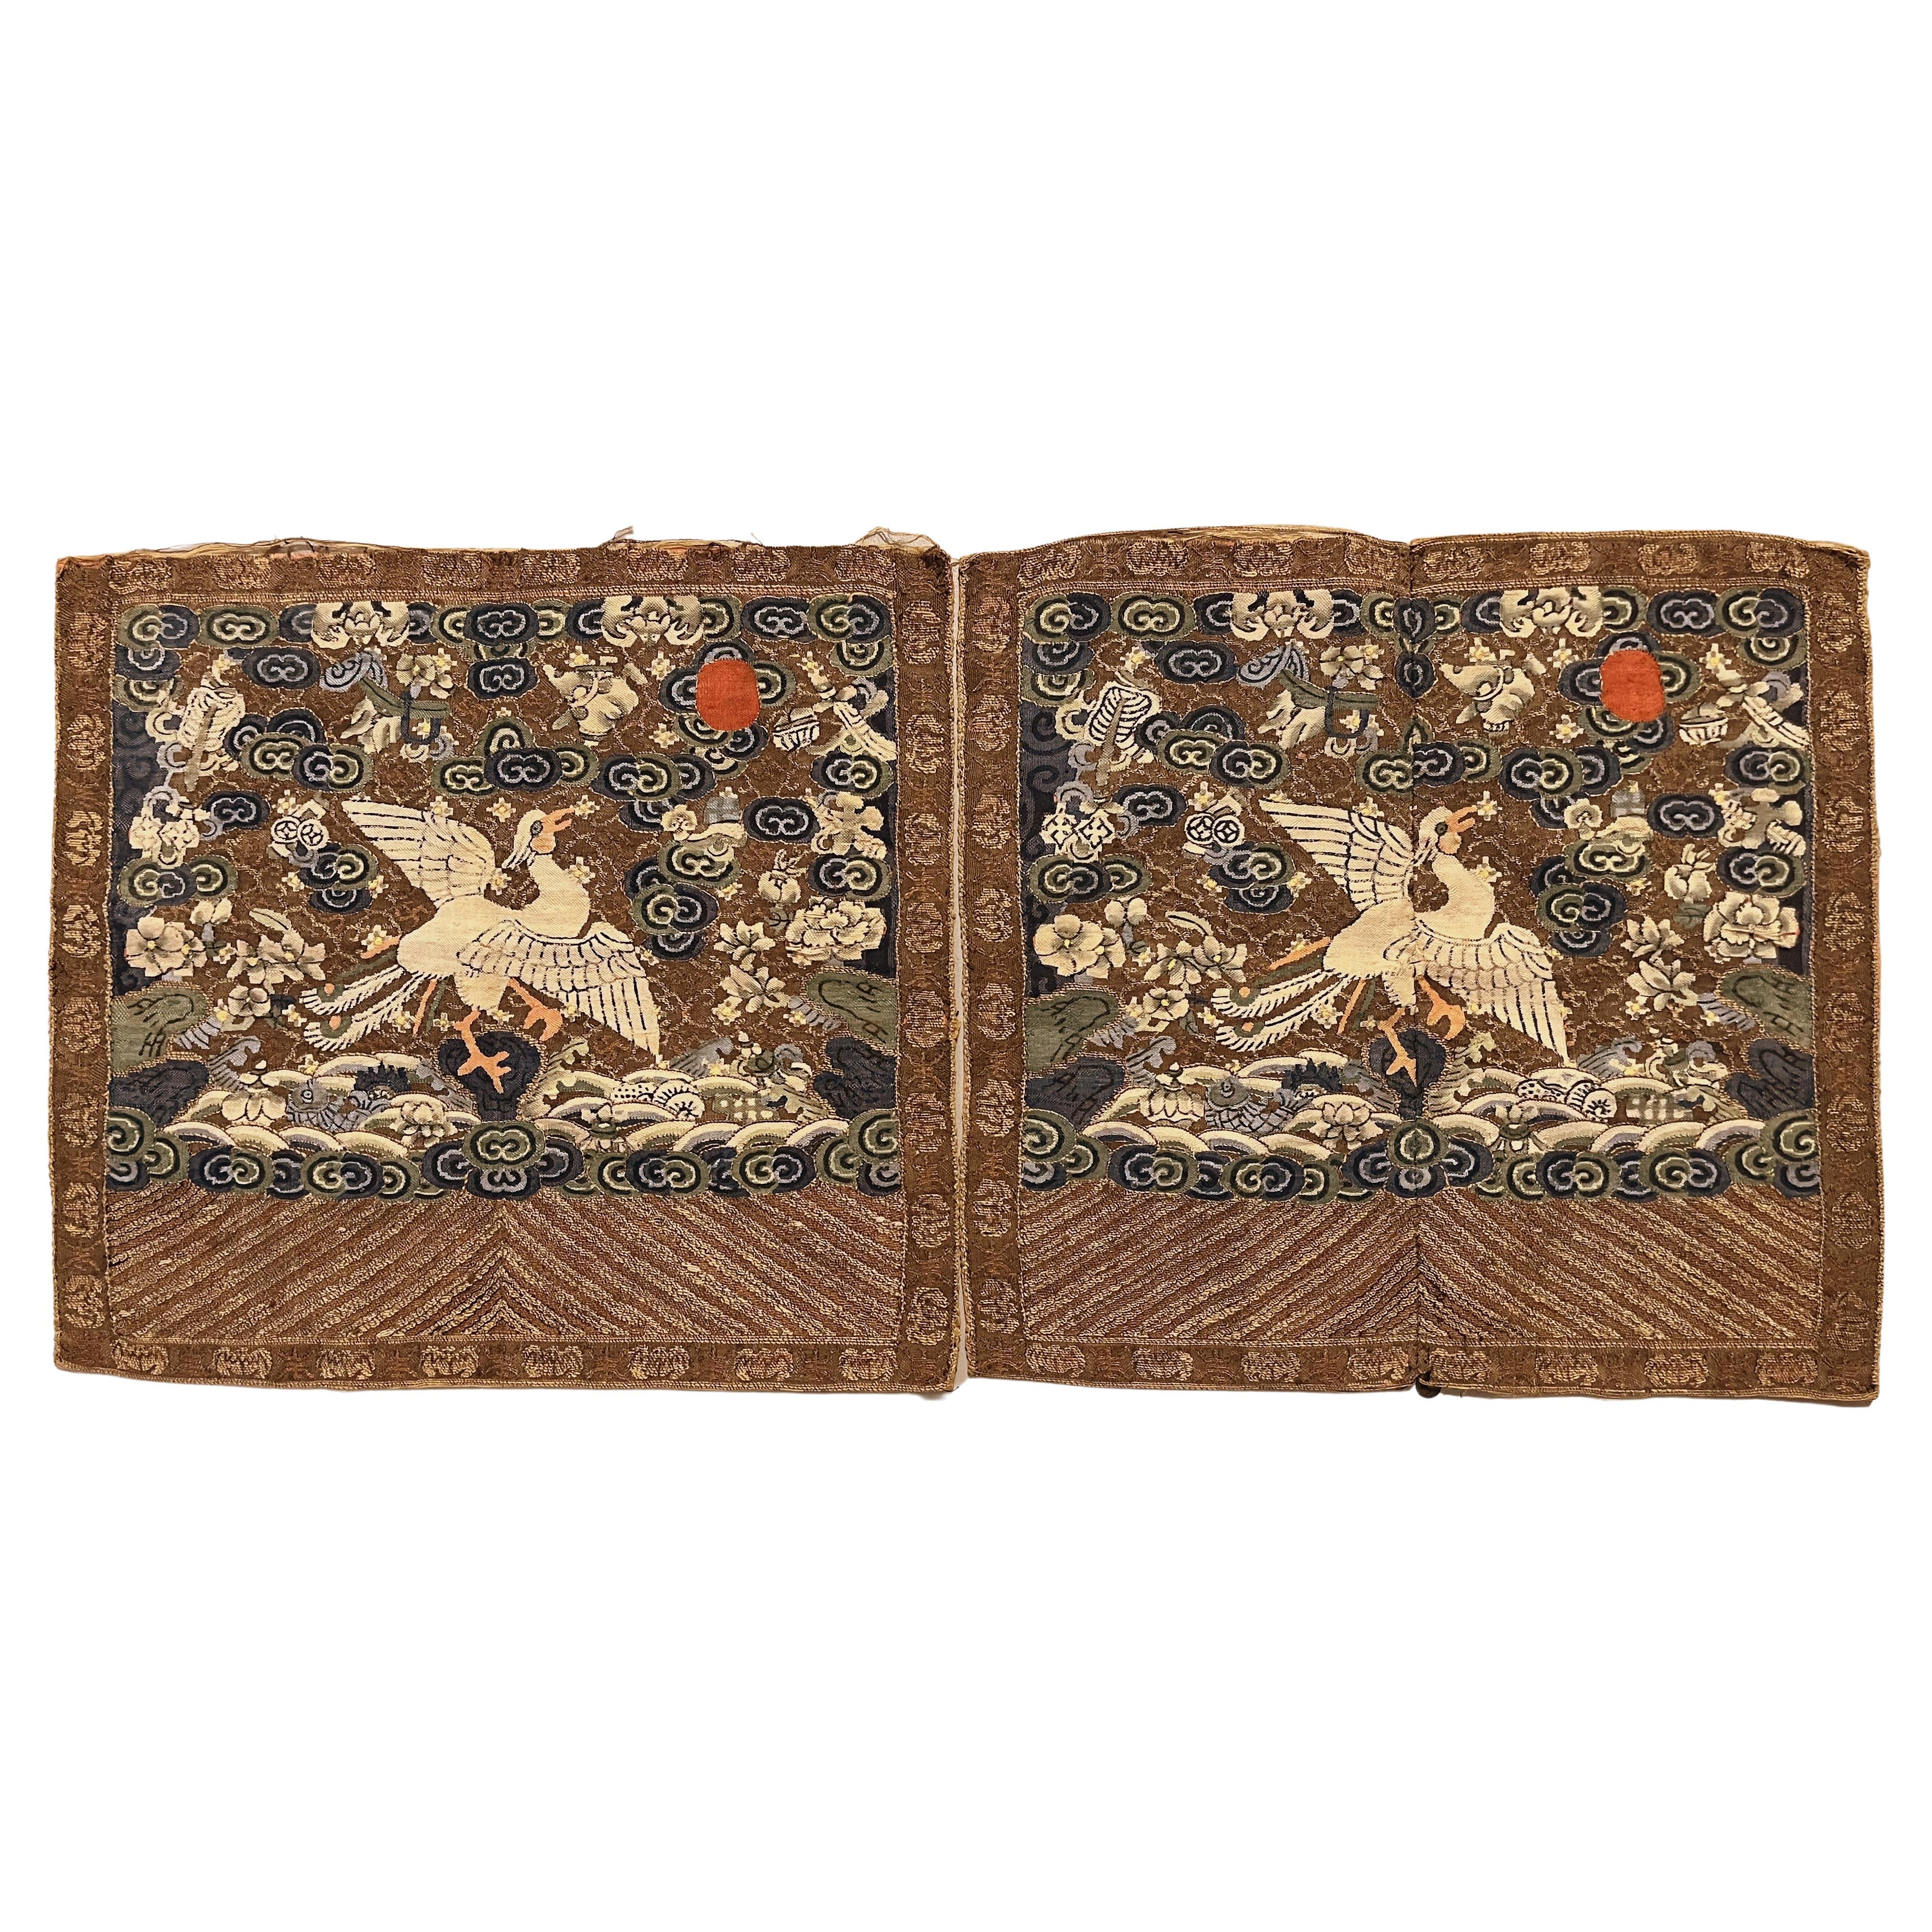 Pair of Qing Dynasty Kesi Imperial Civil Officer Rank Badges For Sale